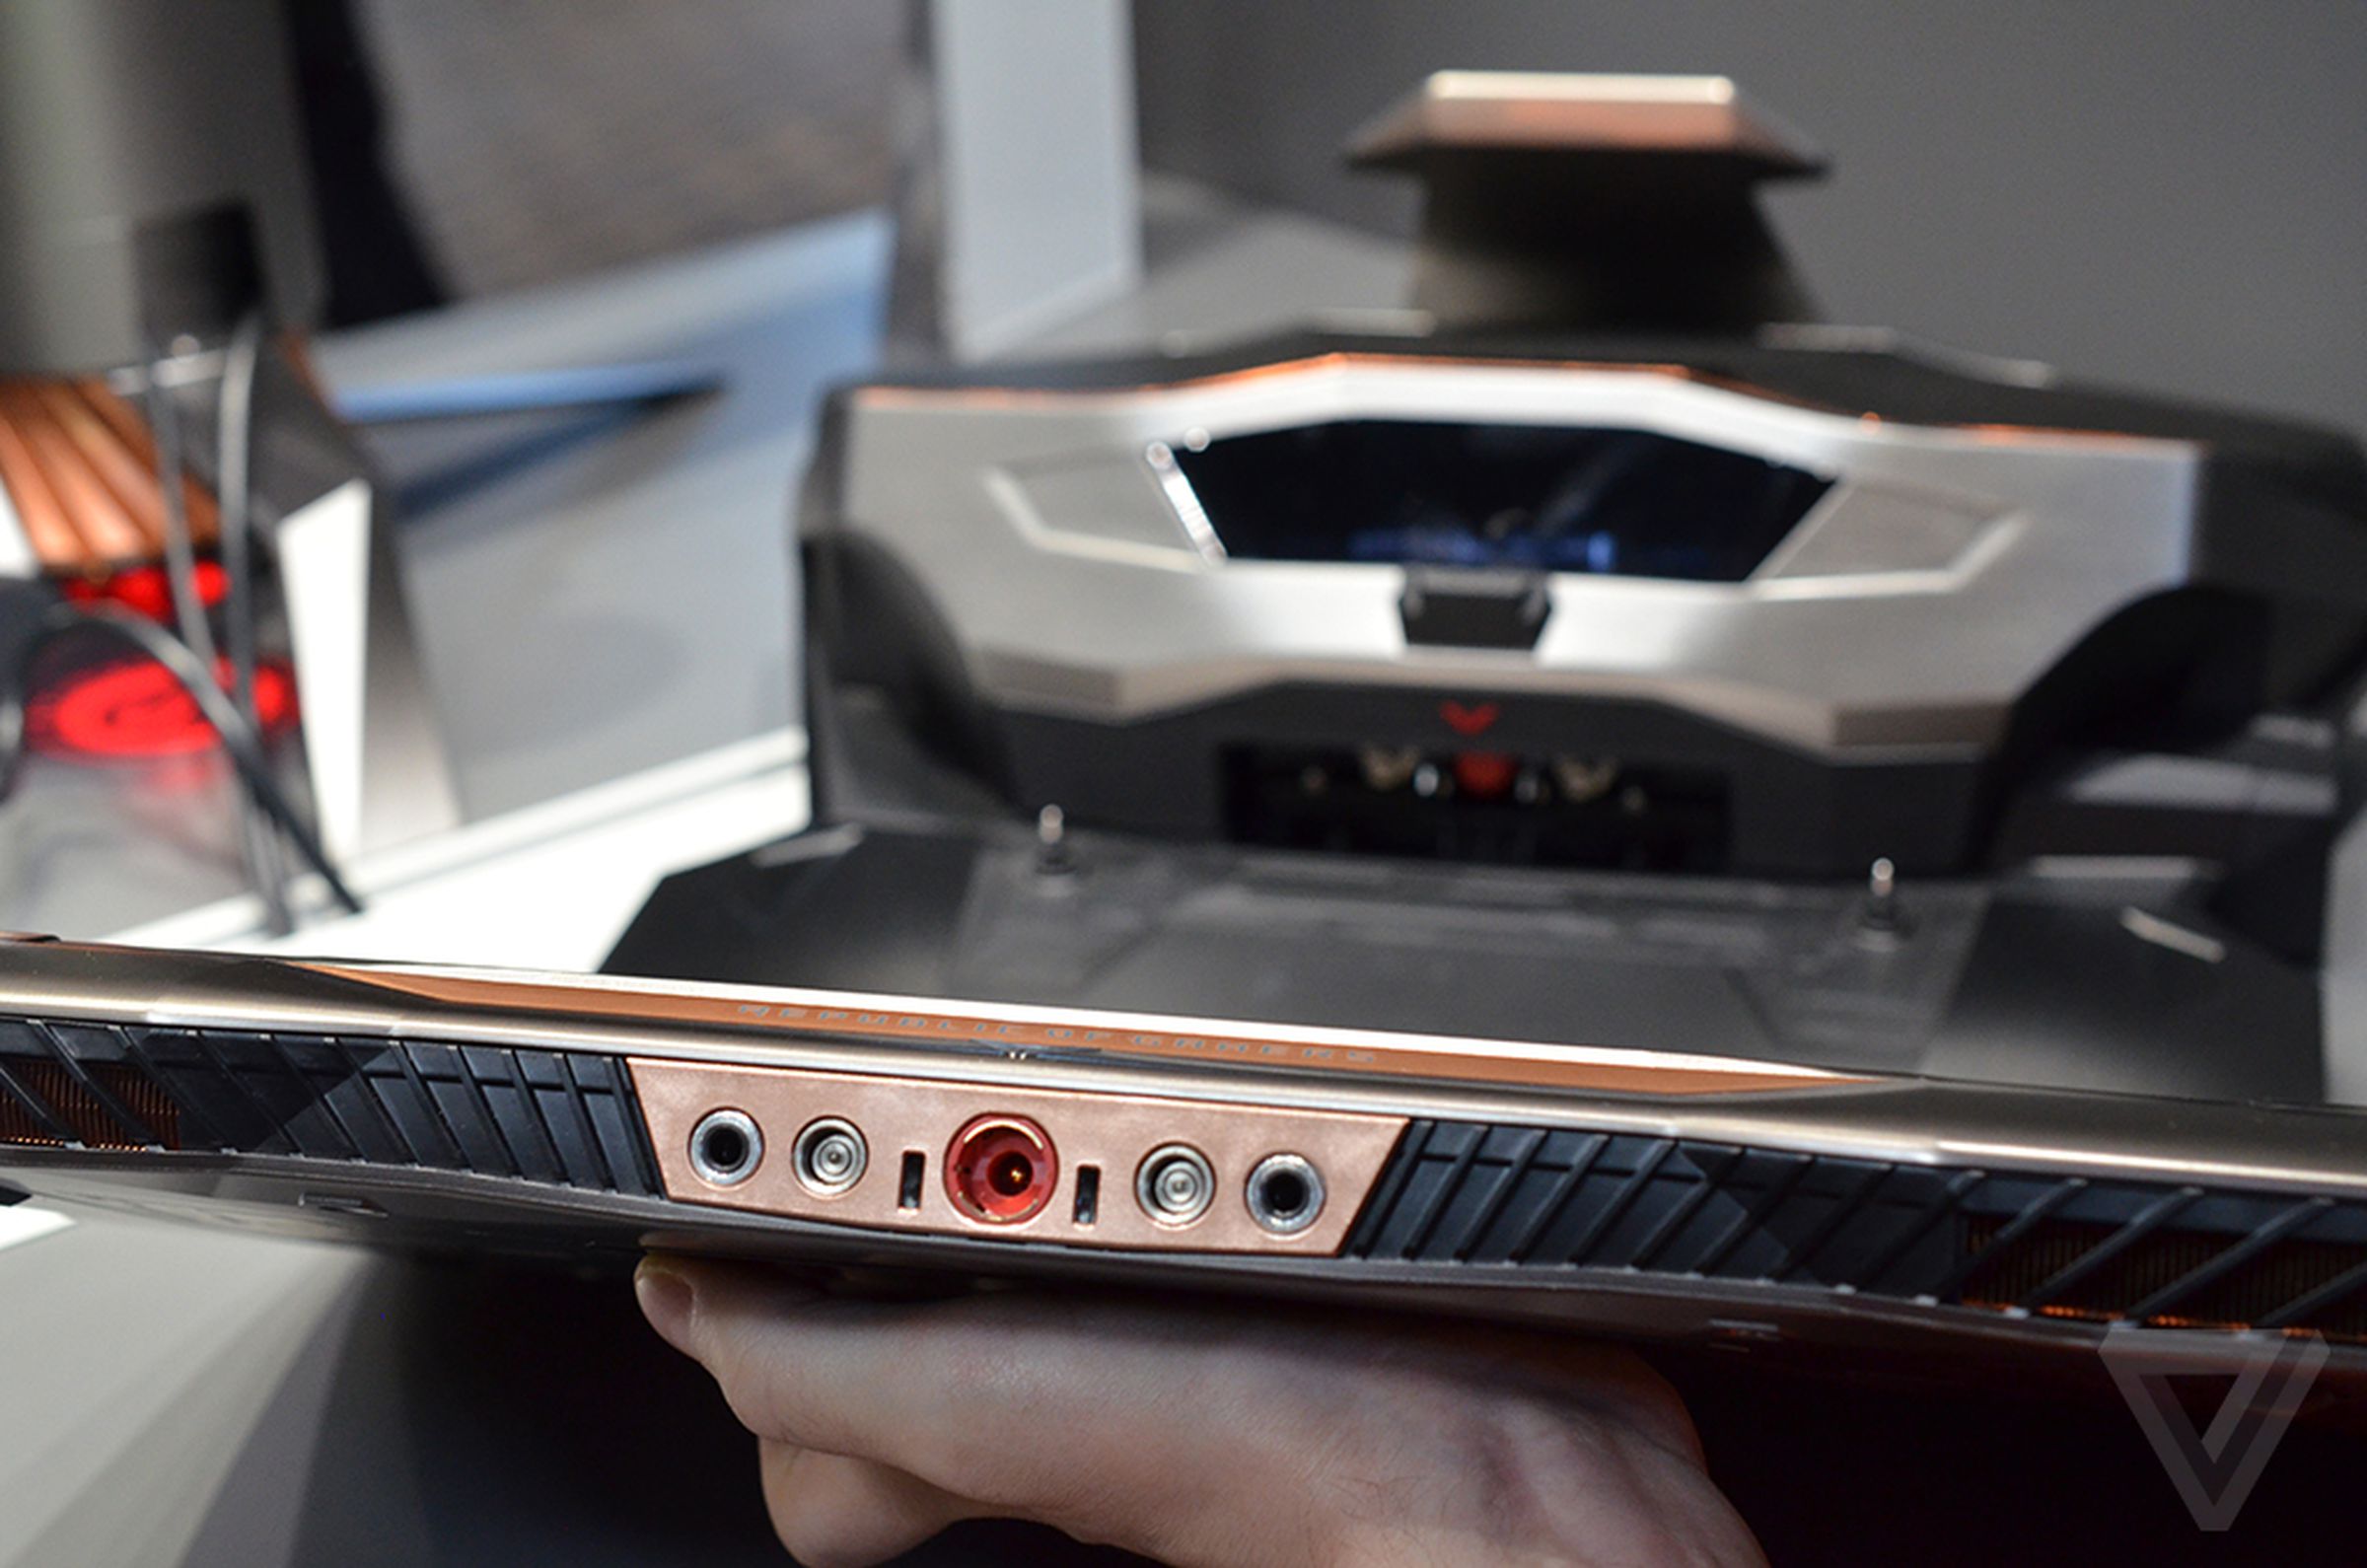 Asus GX700 gaming laptop hands-on photos